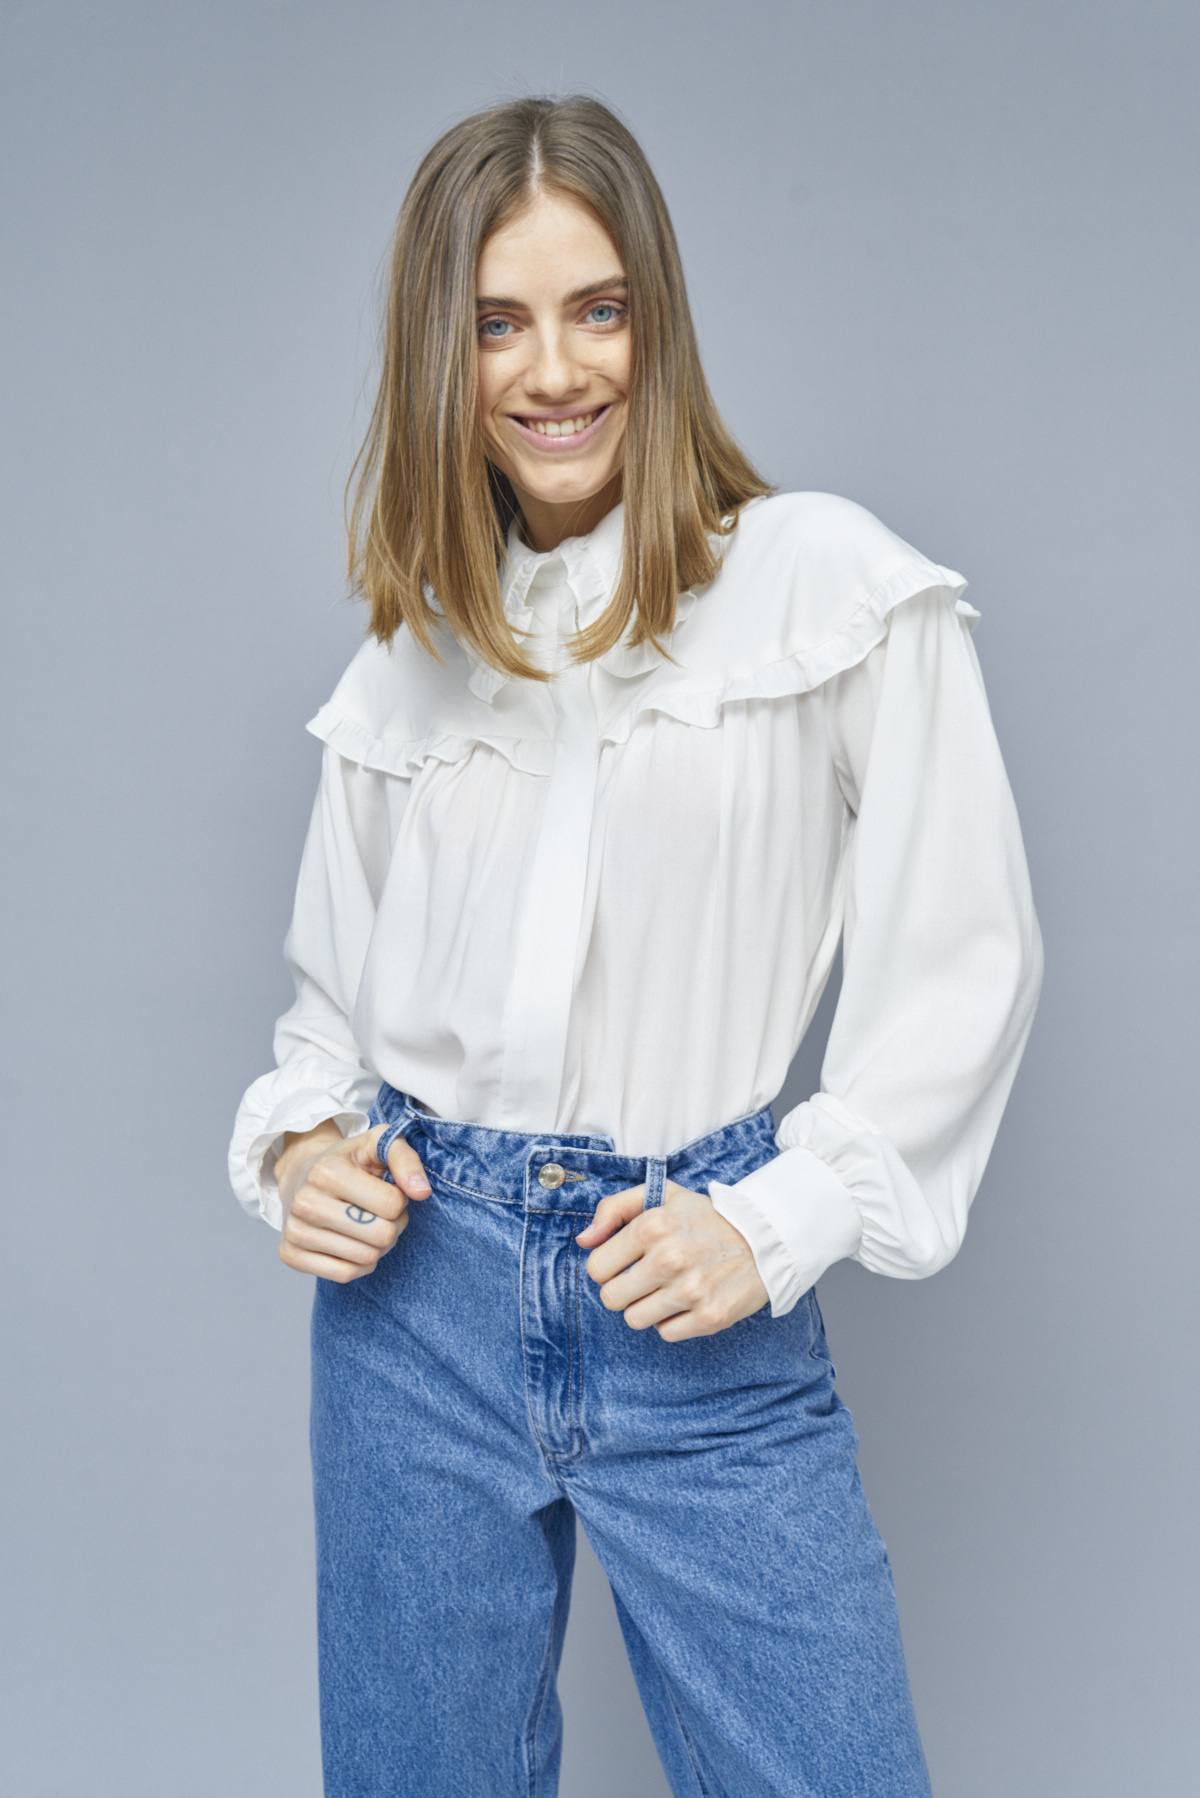 Milk-colored blouse-shirt with ruffles, photo 1